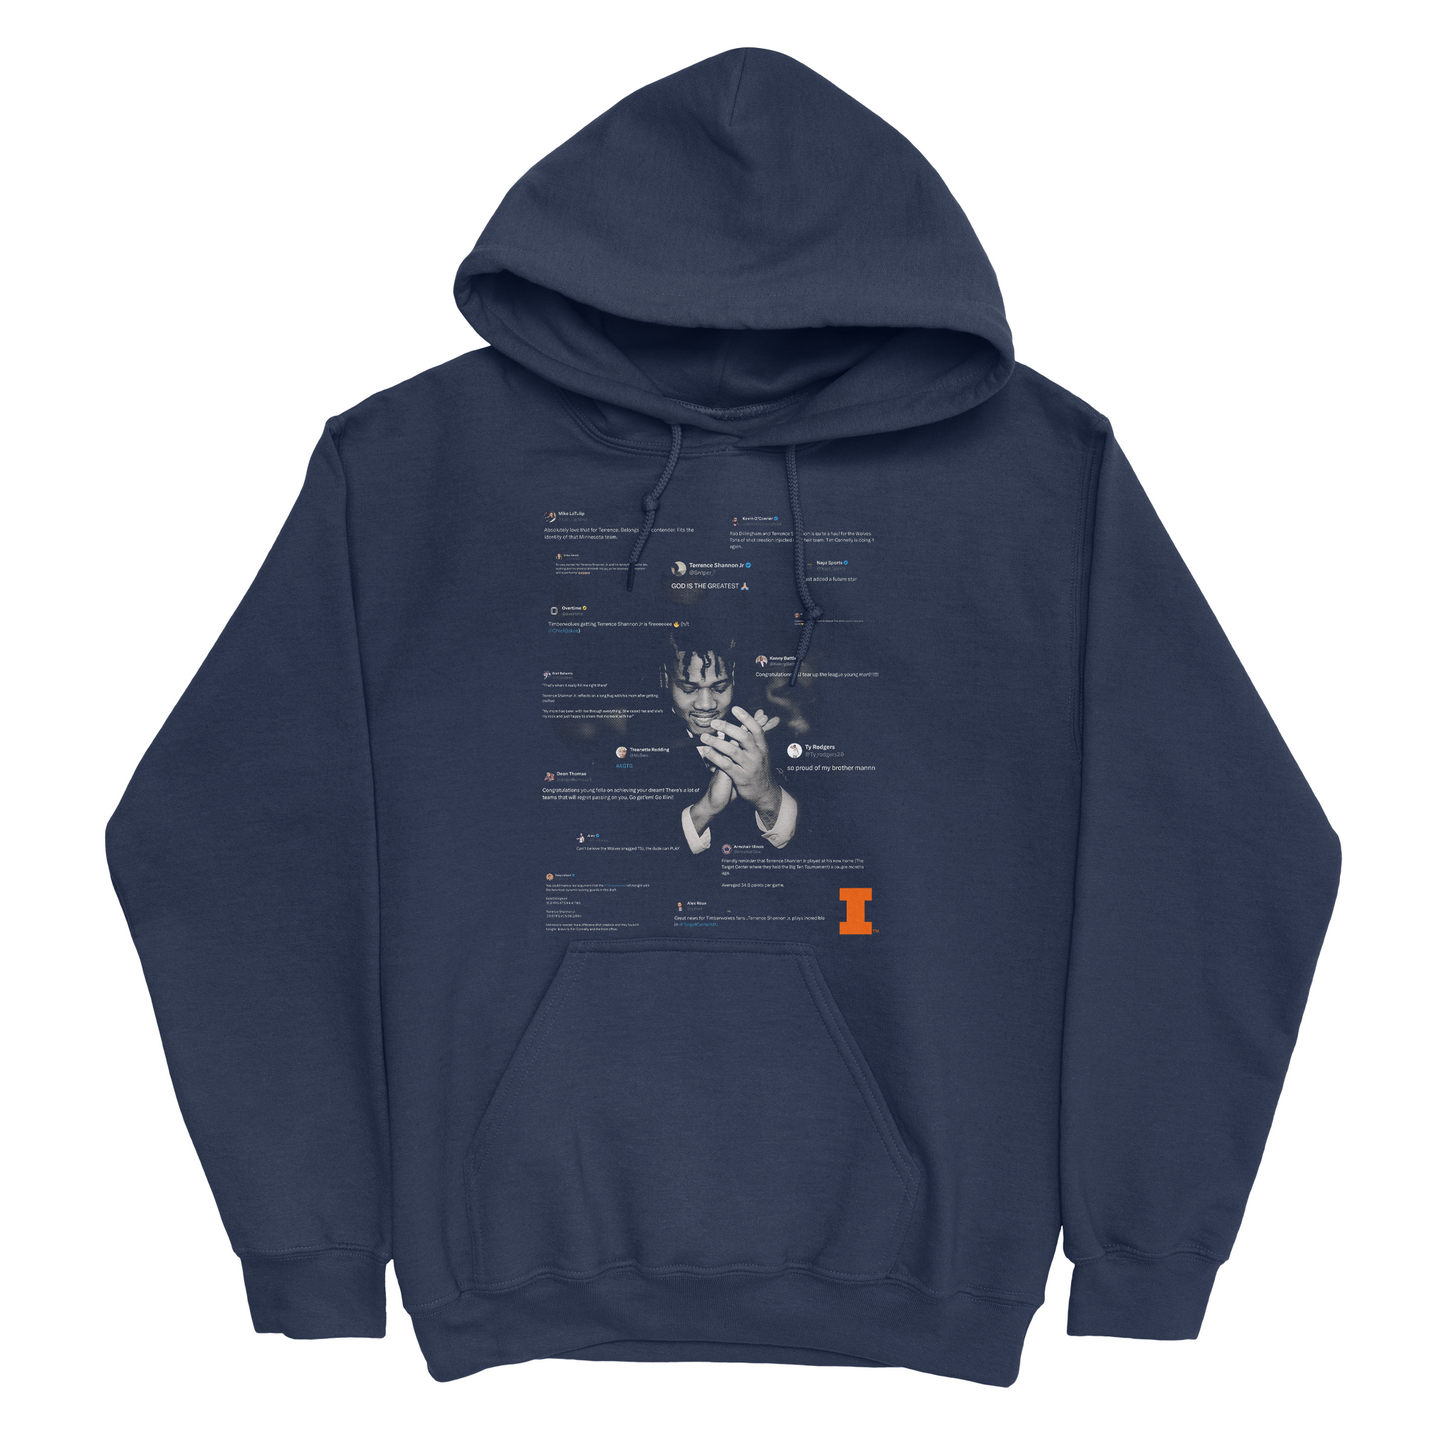 EXCLUSIVE RELEASE: Terrence Shannon Jr. X Hoodie